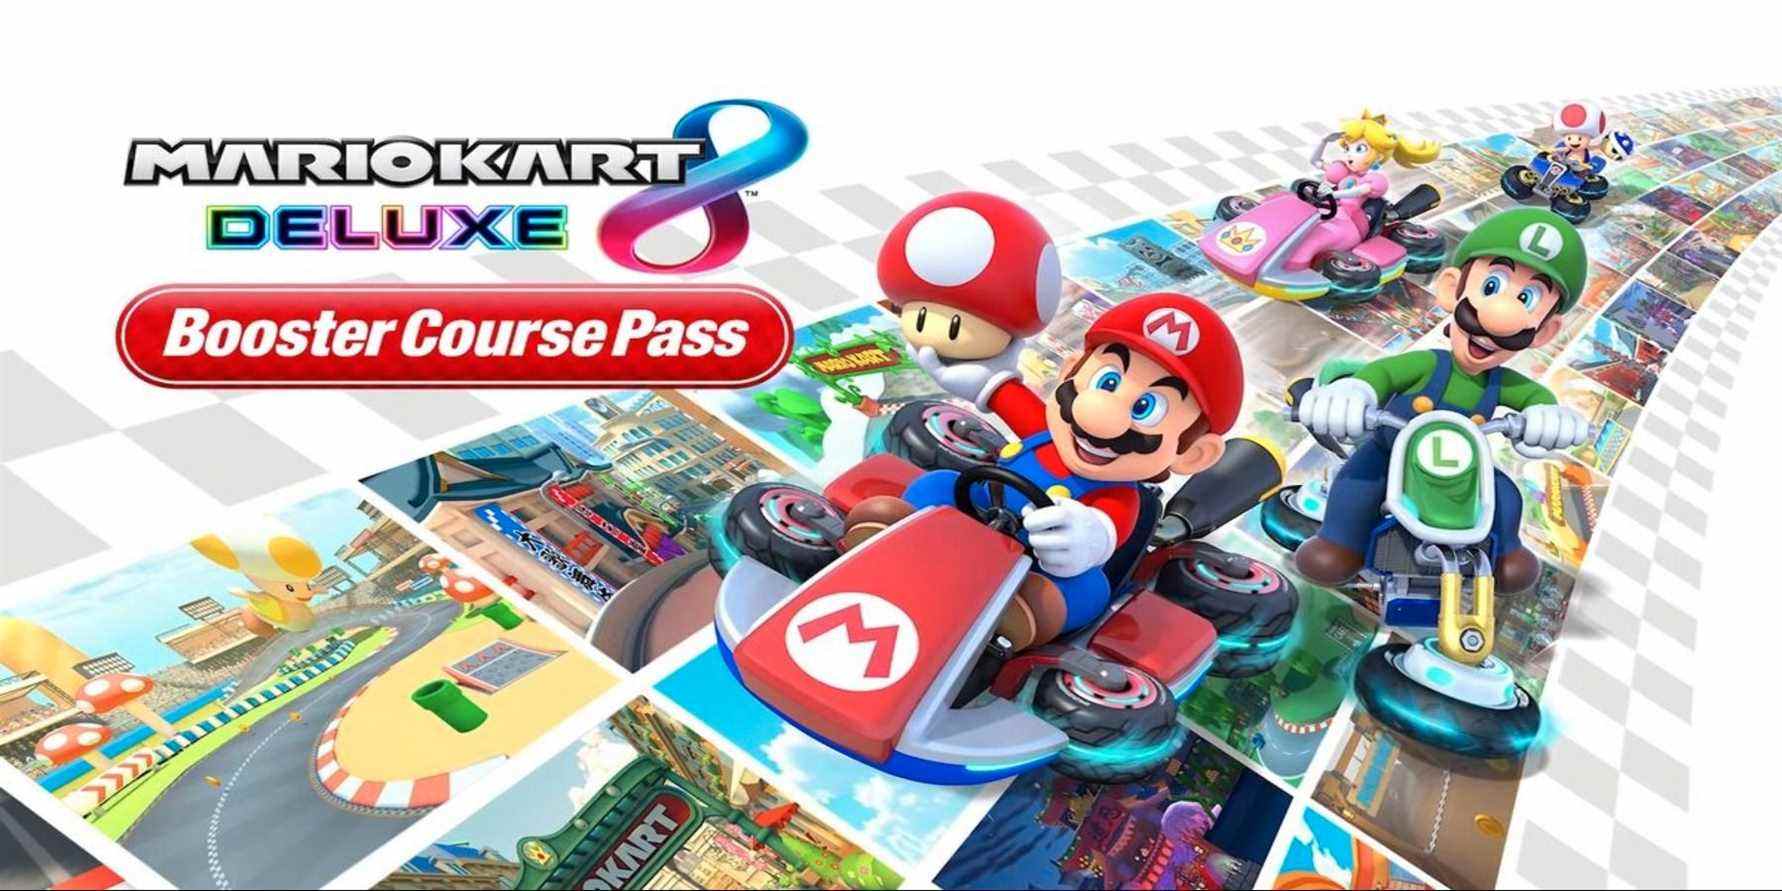 Mario Kart 8 Deluxe Booster Course Pack Key Art Thumbnail